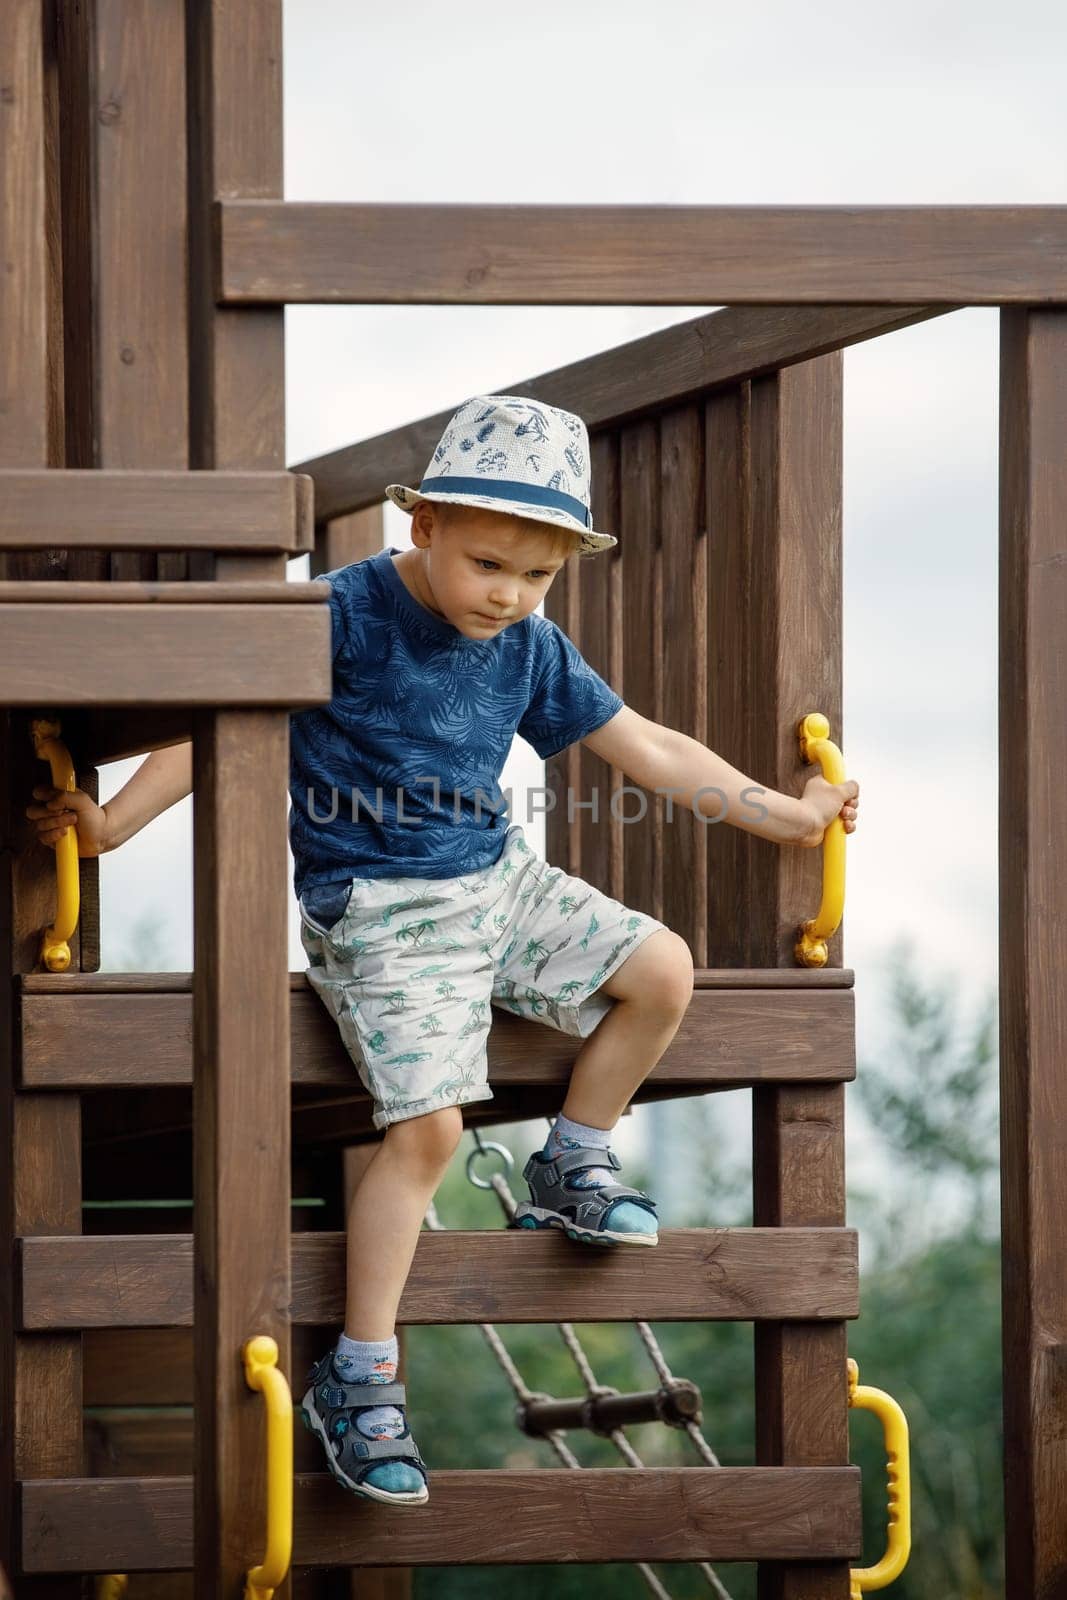 The boy is playing on an outdoor playground, he climbs a wooden ladder dangerously by Lincikas